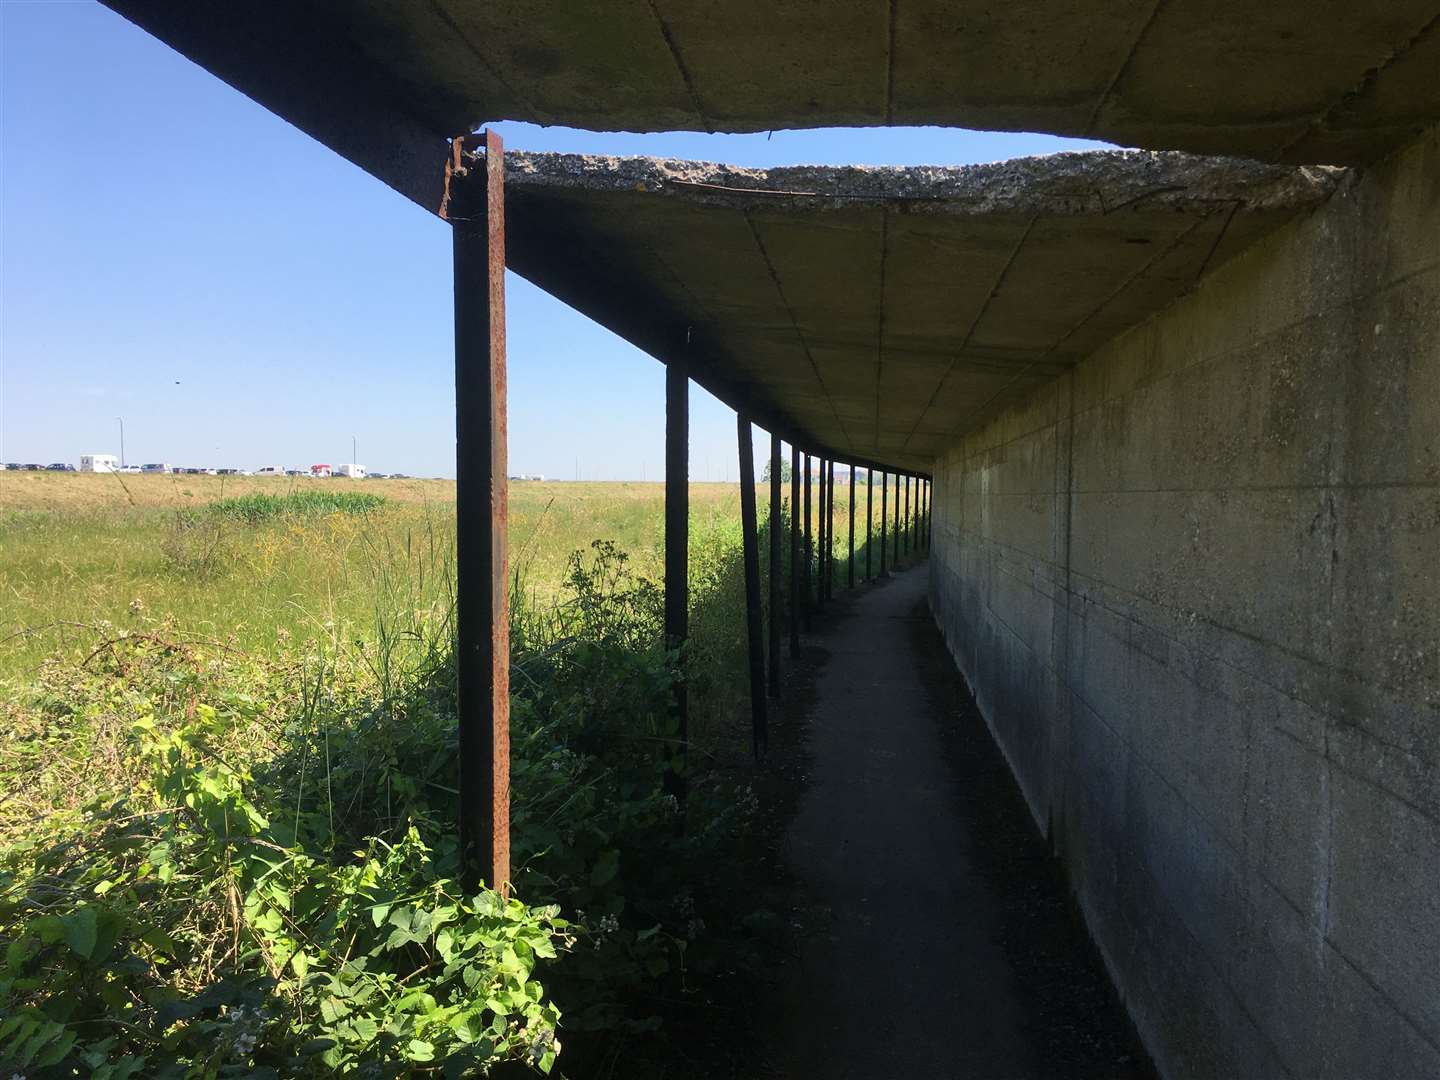 The state of the old covered way at Sheerness on Sheppey last summer with graffiti and dangerous gaps in its concrete roof